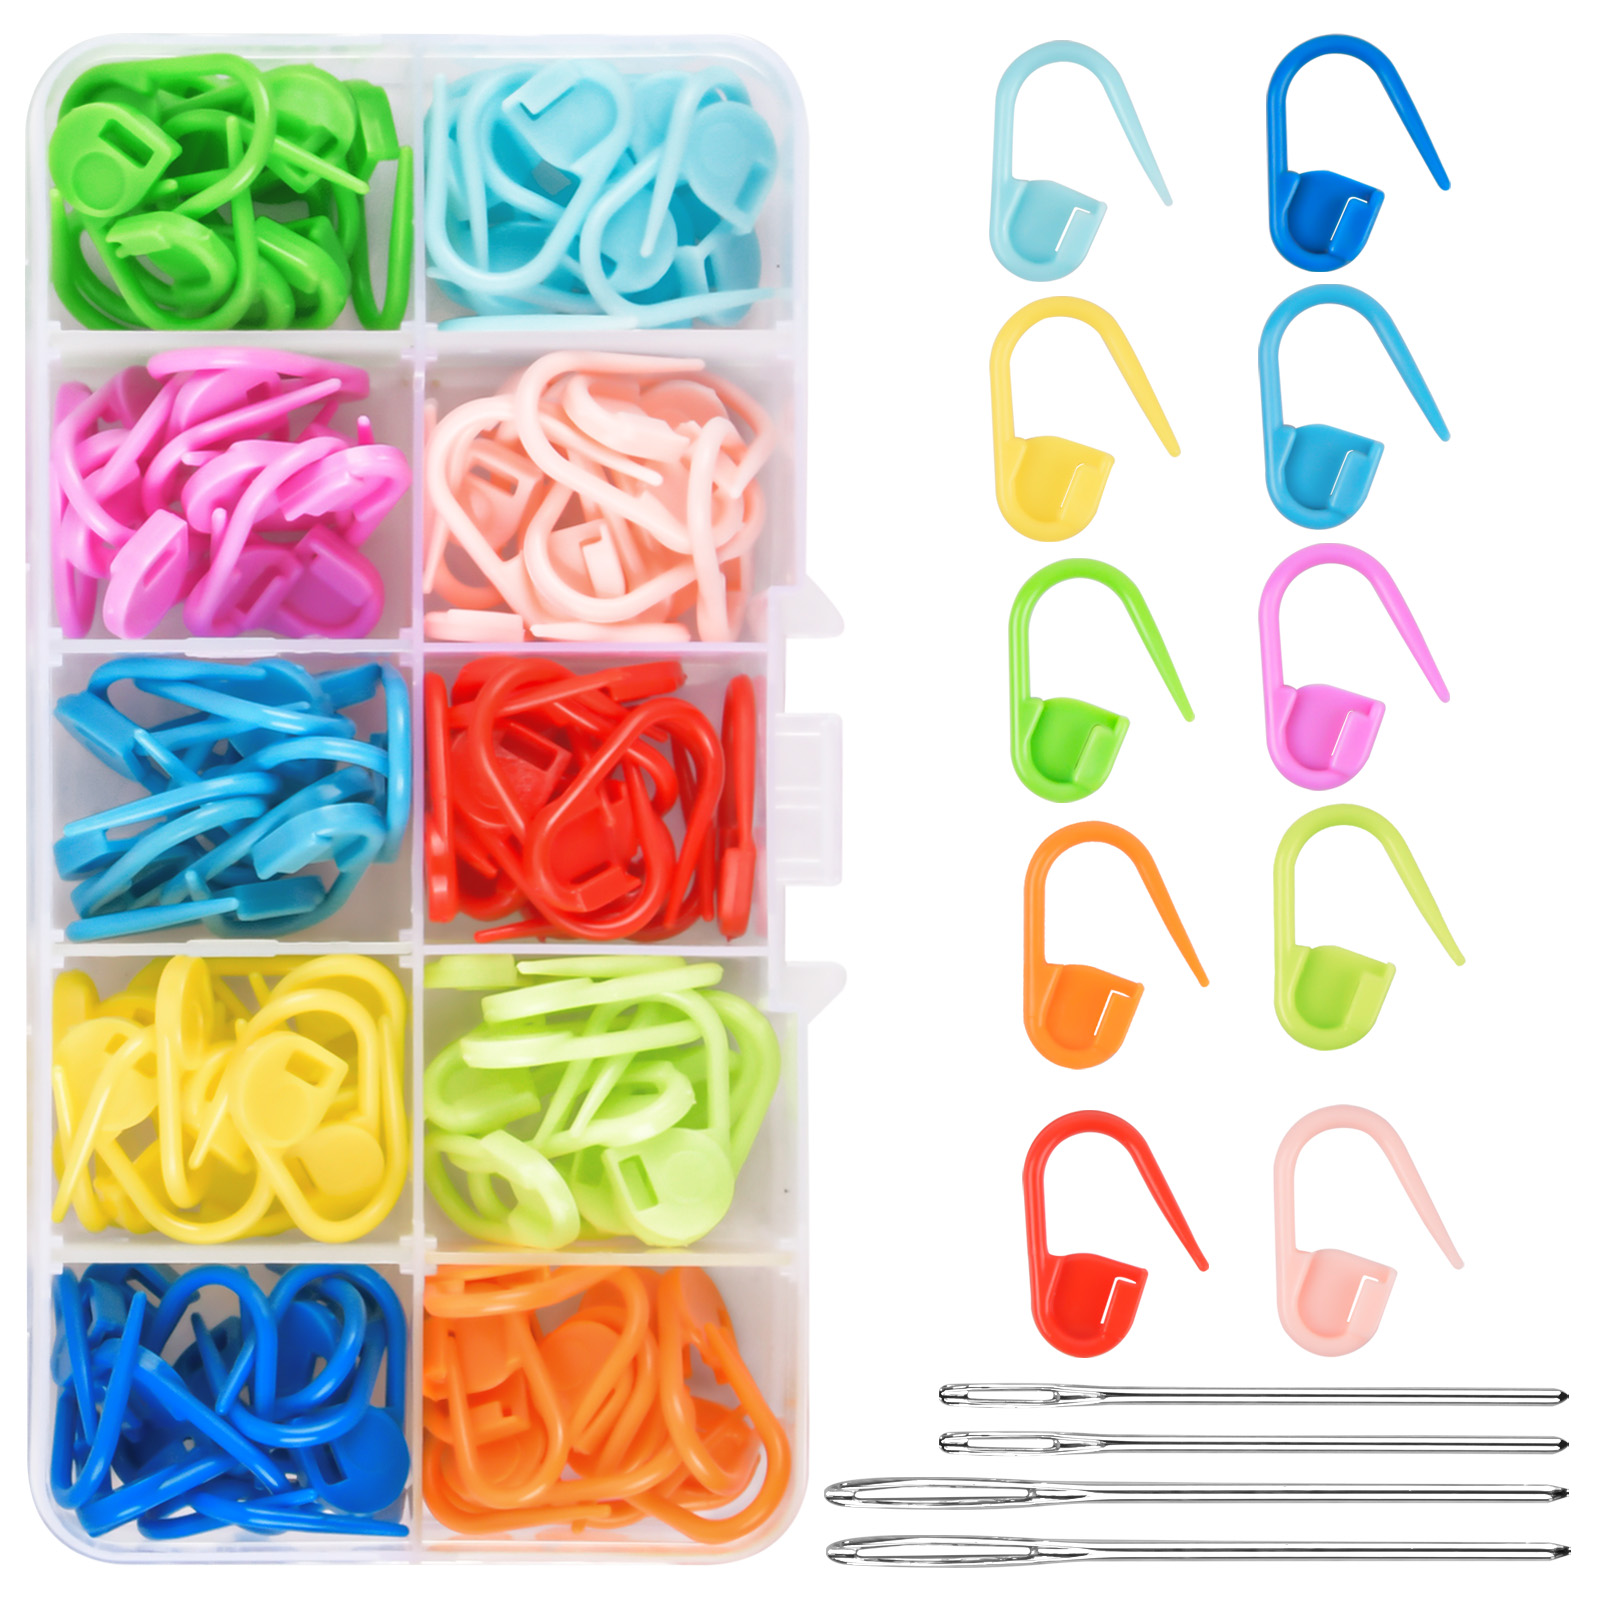  Sihuuu 120 Pcs Colorful Knitting Markers, Plastic Crochet Pins  Clips with Box, Knitting Place Markers, Stitch Counter Needle Clips,  Locking Stitch Safety Pins for DIY, Sewing, Craft,Weaving